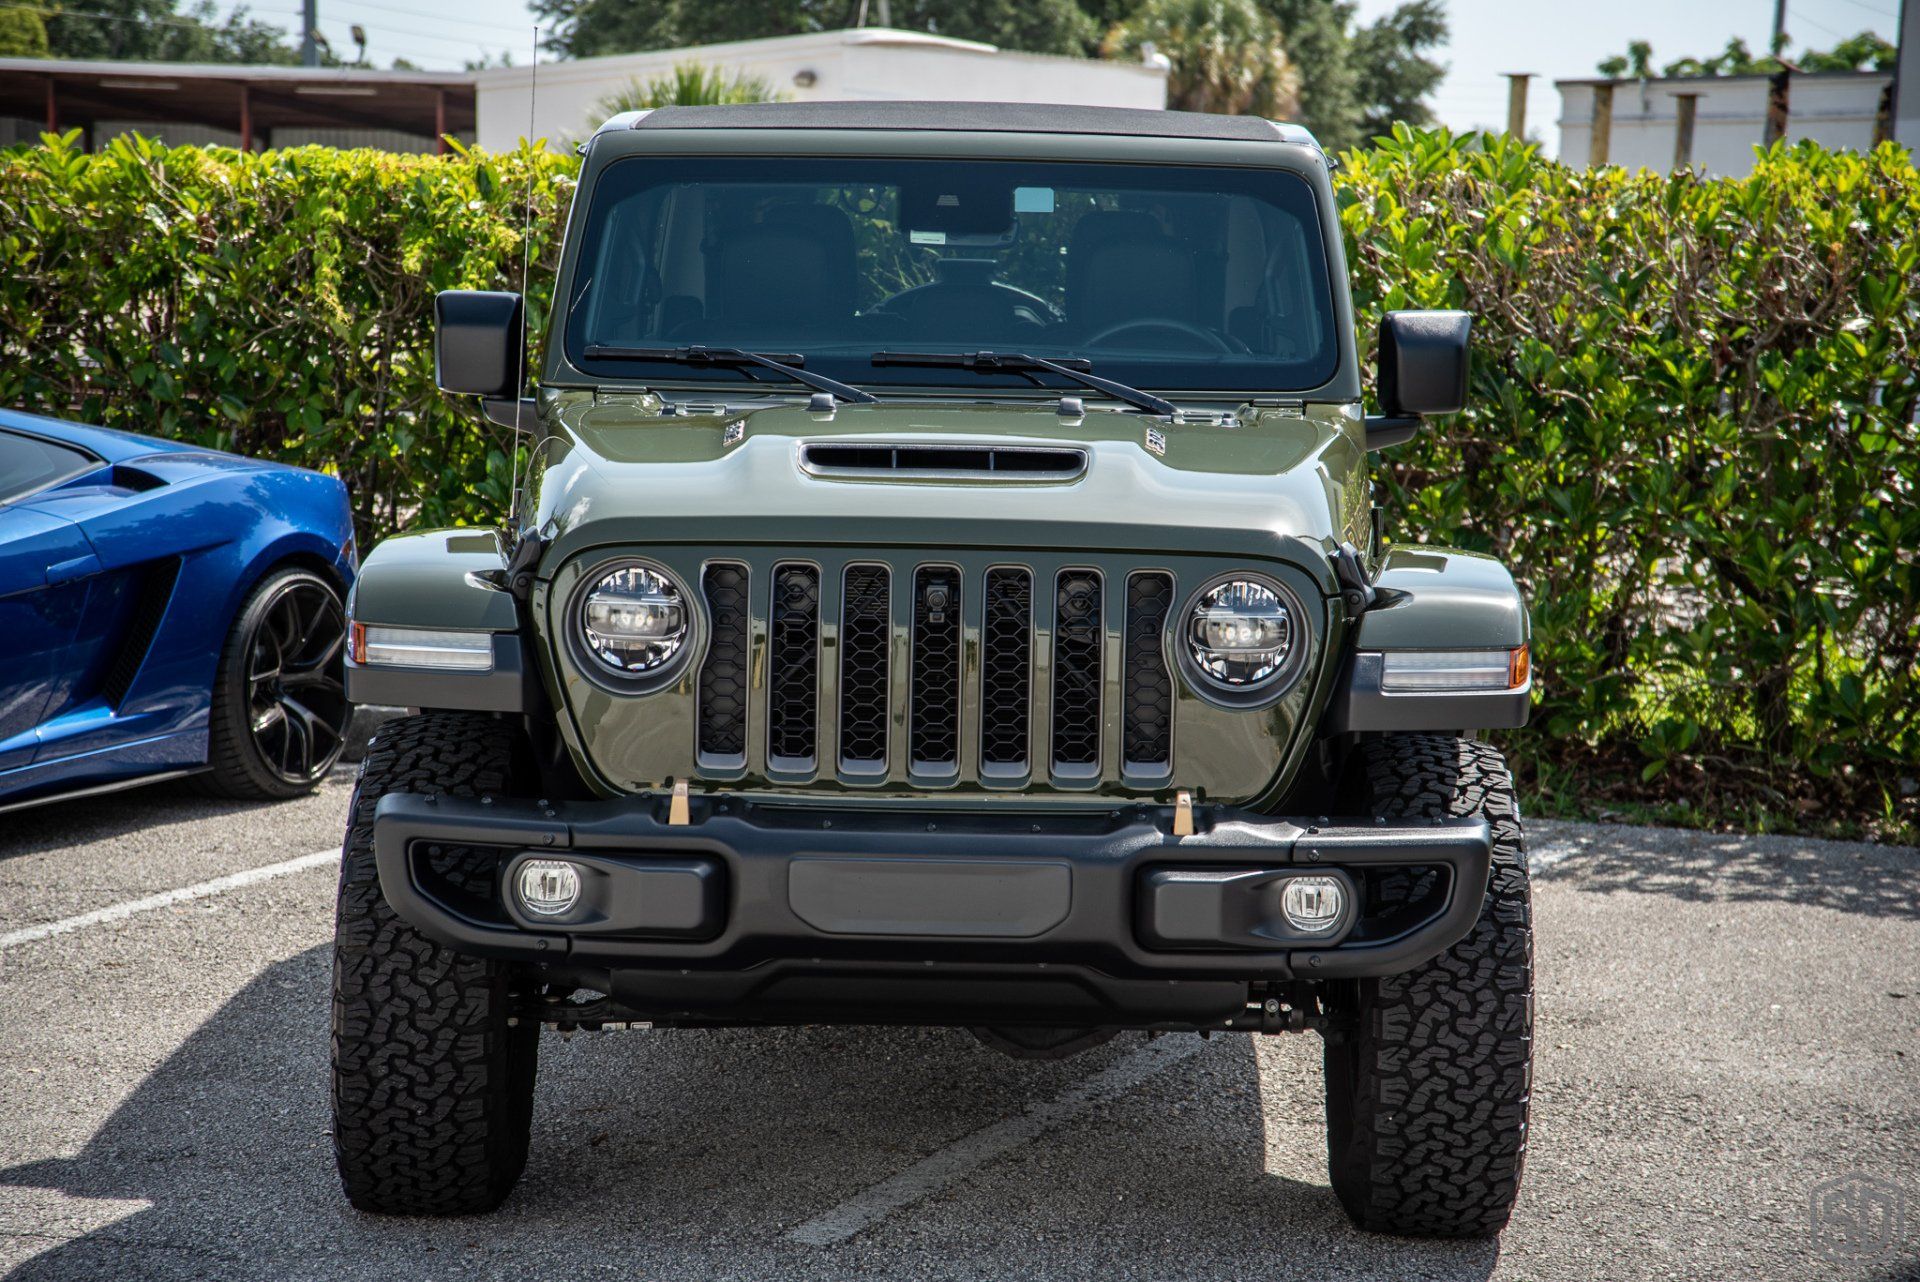 2021 Jeep Rubicon 392 Fully Detailed and Protected with PPF and all the Modesta Coatings Orlando Florida